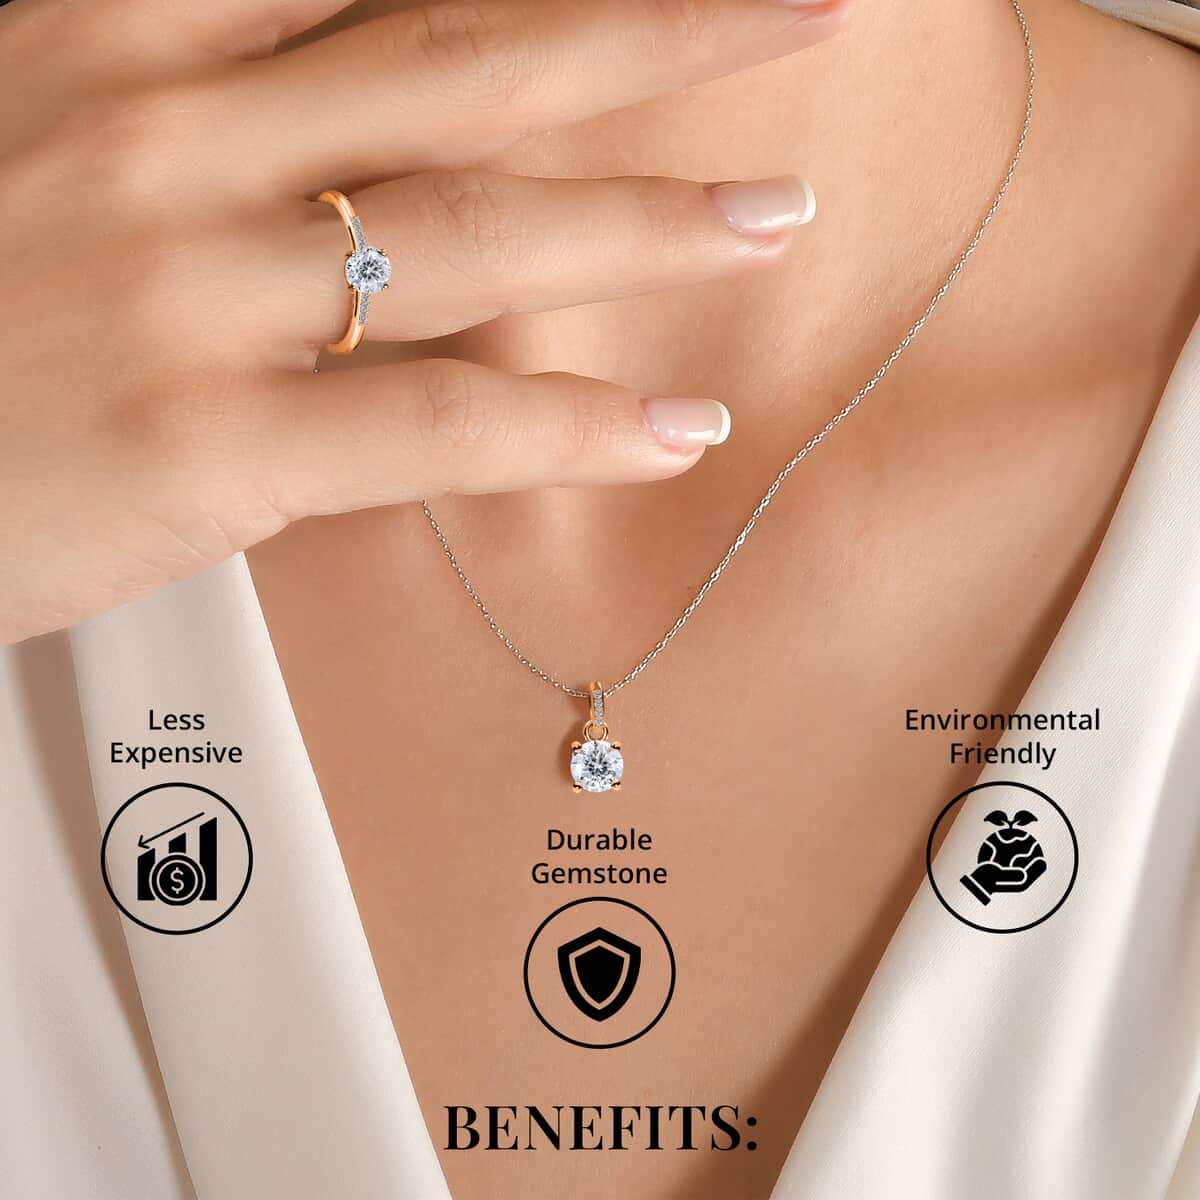 100 Facets Moissanite 1.65 ctw Solitaire Ring and Pendant Set in Vermeil Rose Gold Over Sterling Silver, Moissanite Solitaire Ring, Jewelry Set For Her (Size 6.00) image number 3